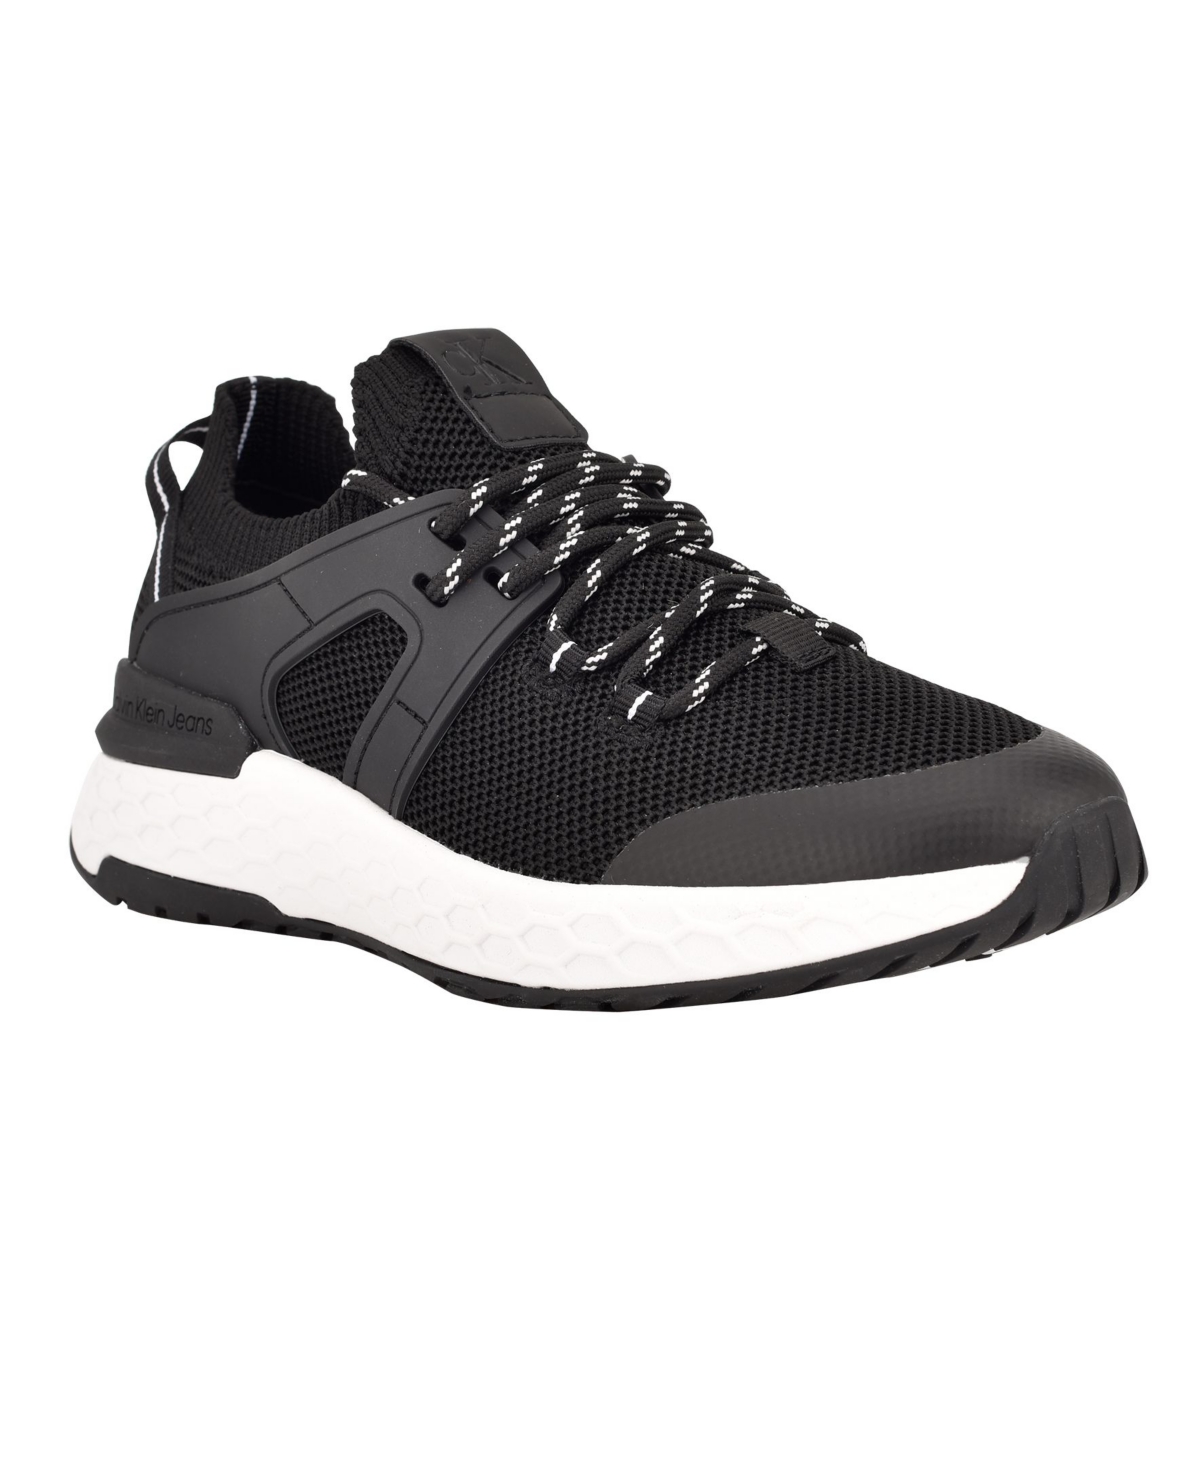 UPC 195972002340 product image for Calvin Klein Women's Aleah Lace-Up Sneakers Women's Shoes | upcitemdb.com